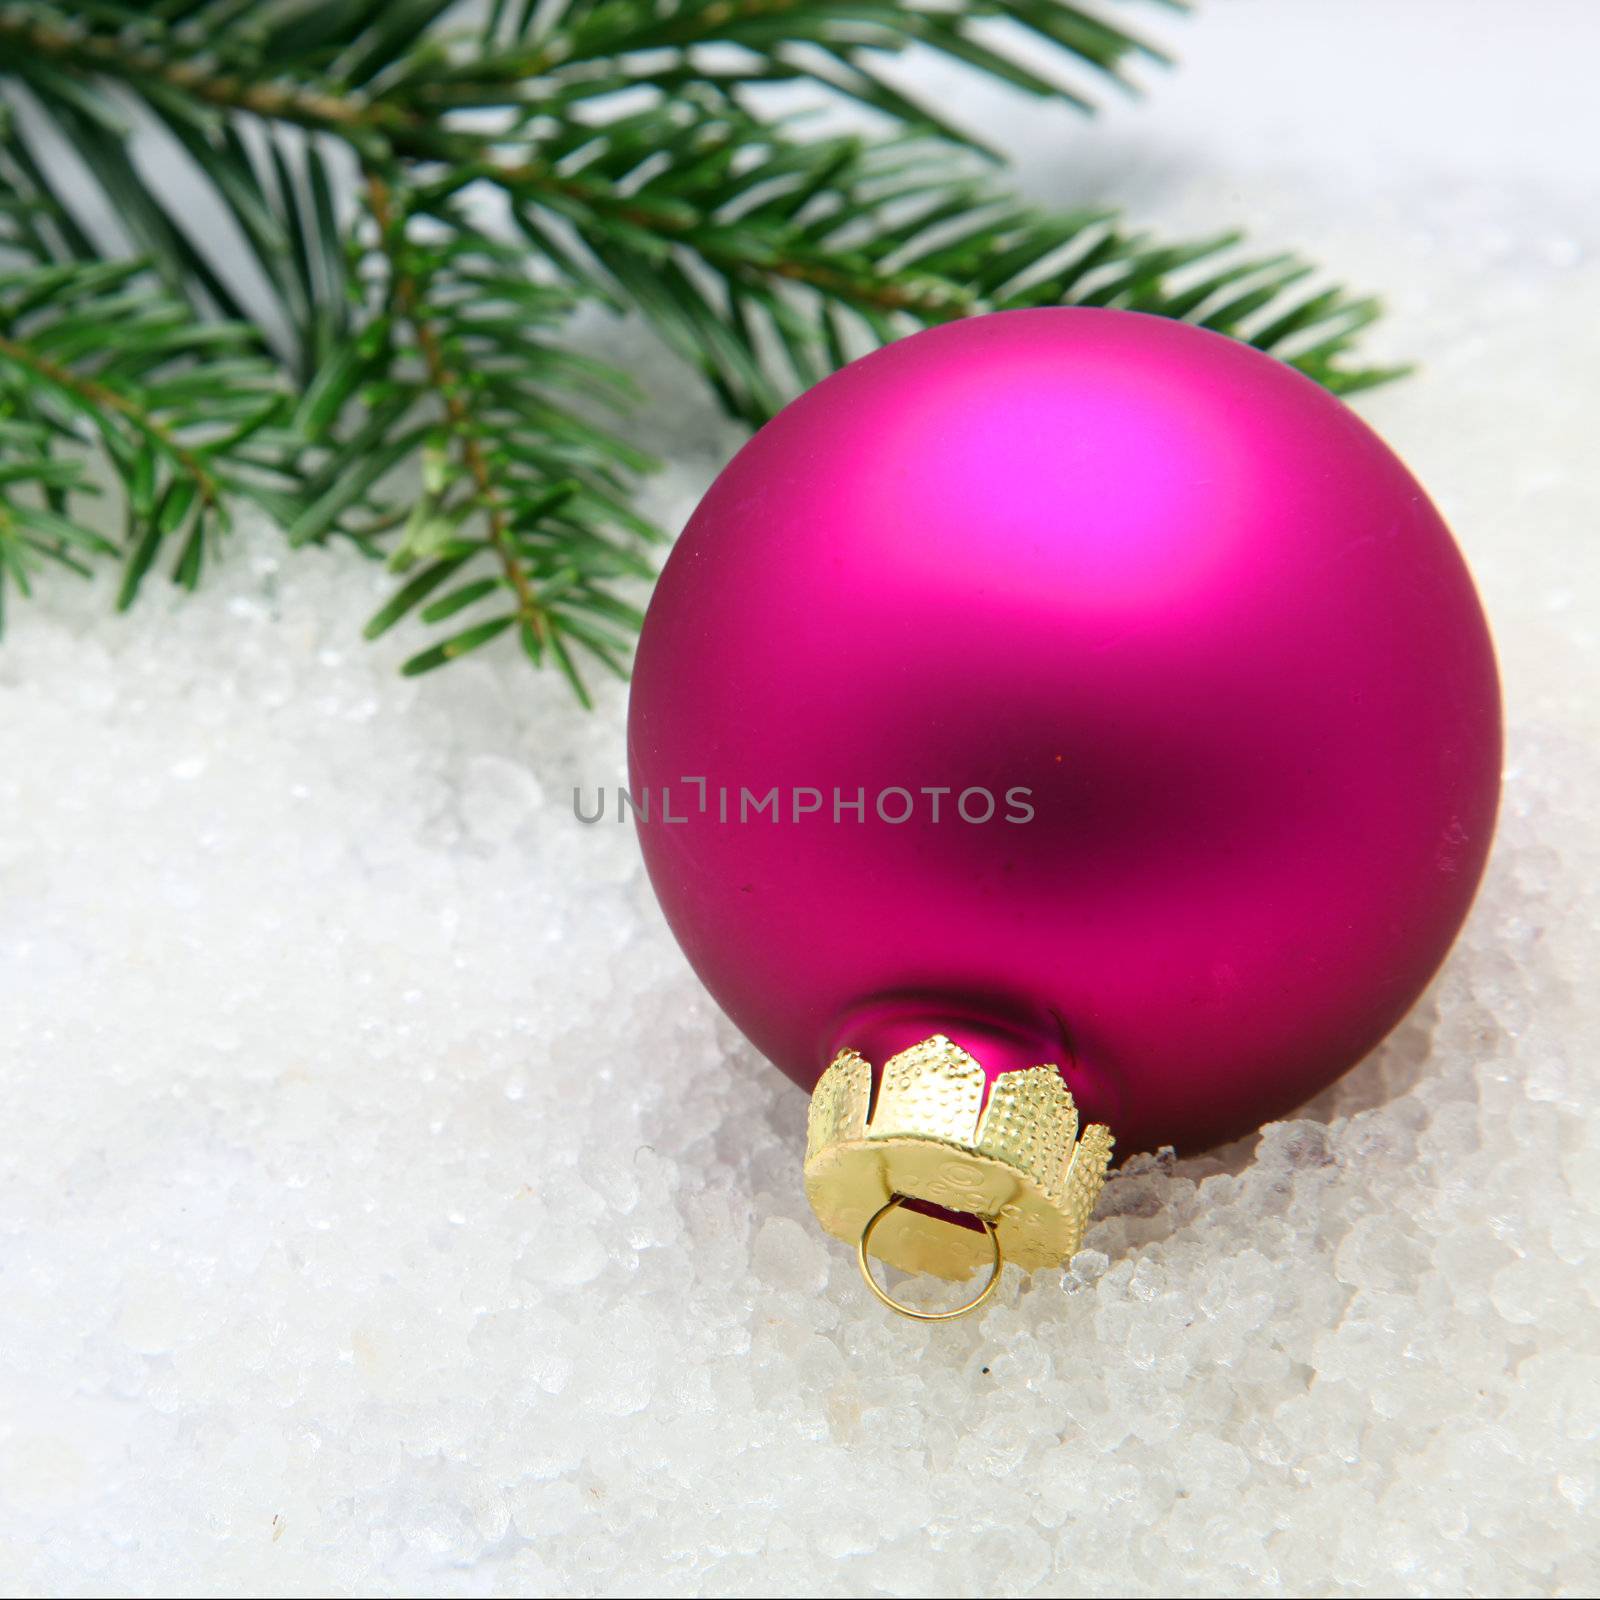 Fuchsia colored Christmas bauble on snow with pine tree branches